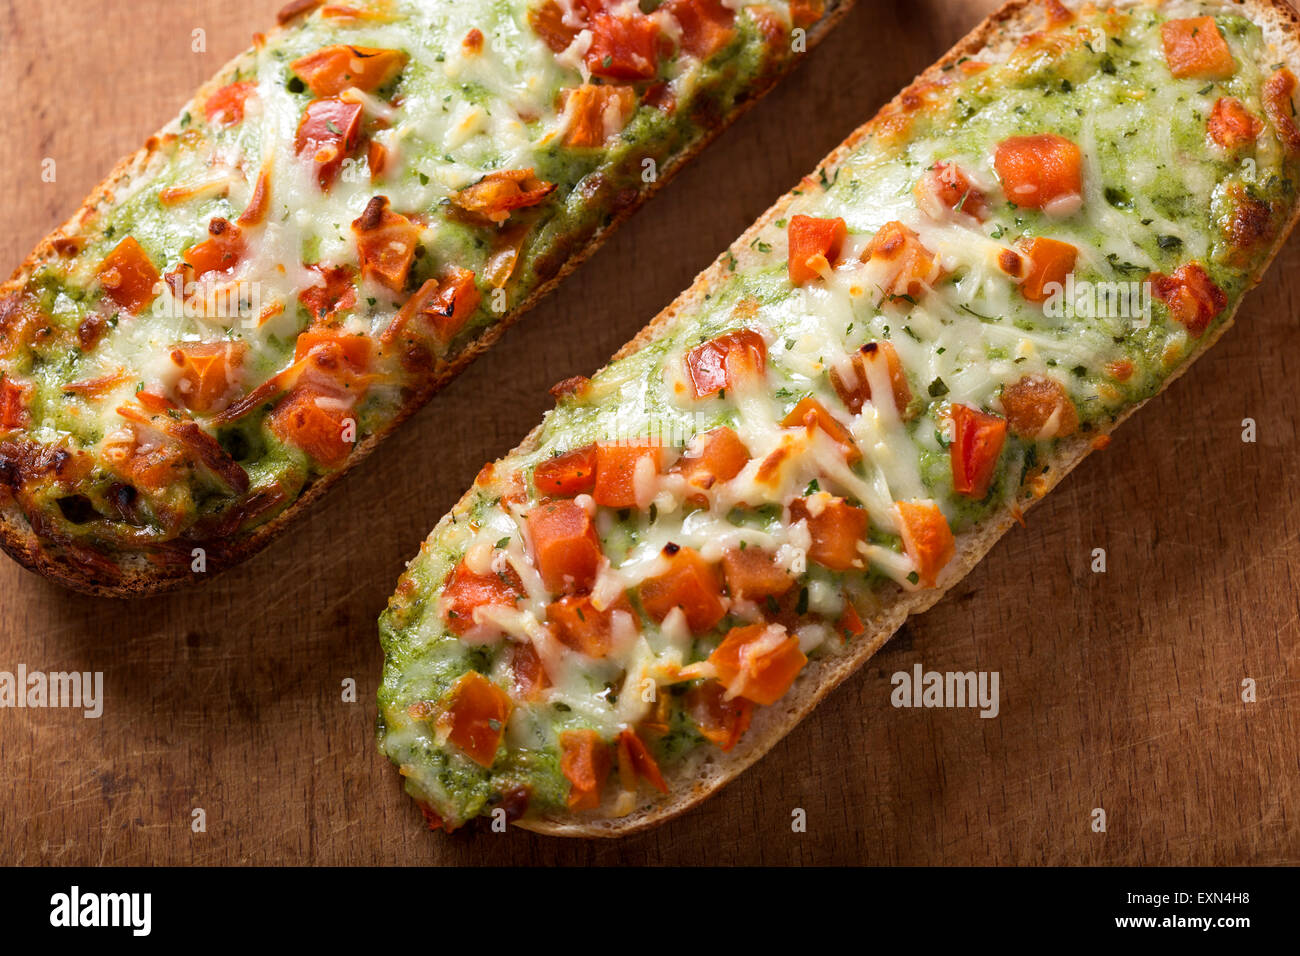 Baguettes with pesto on rustic background Stock Photo